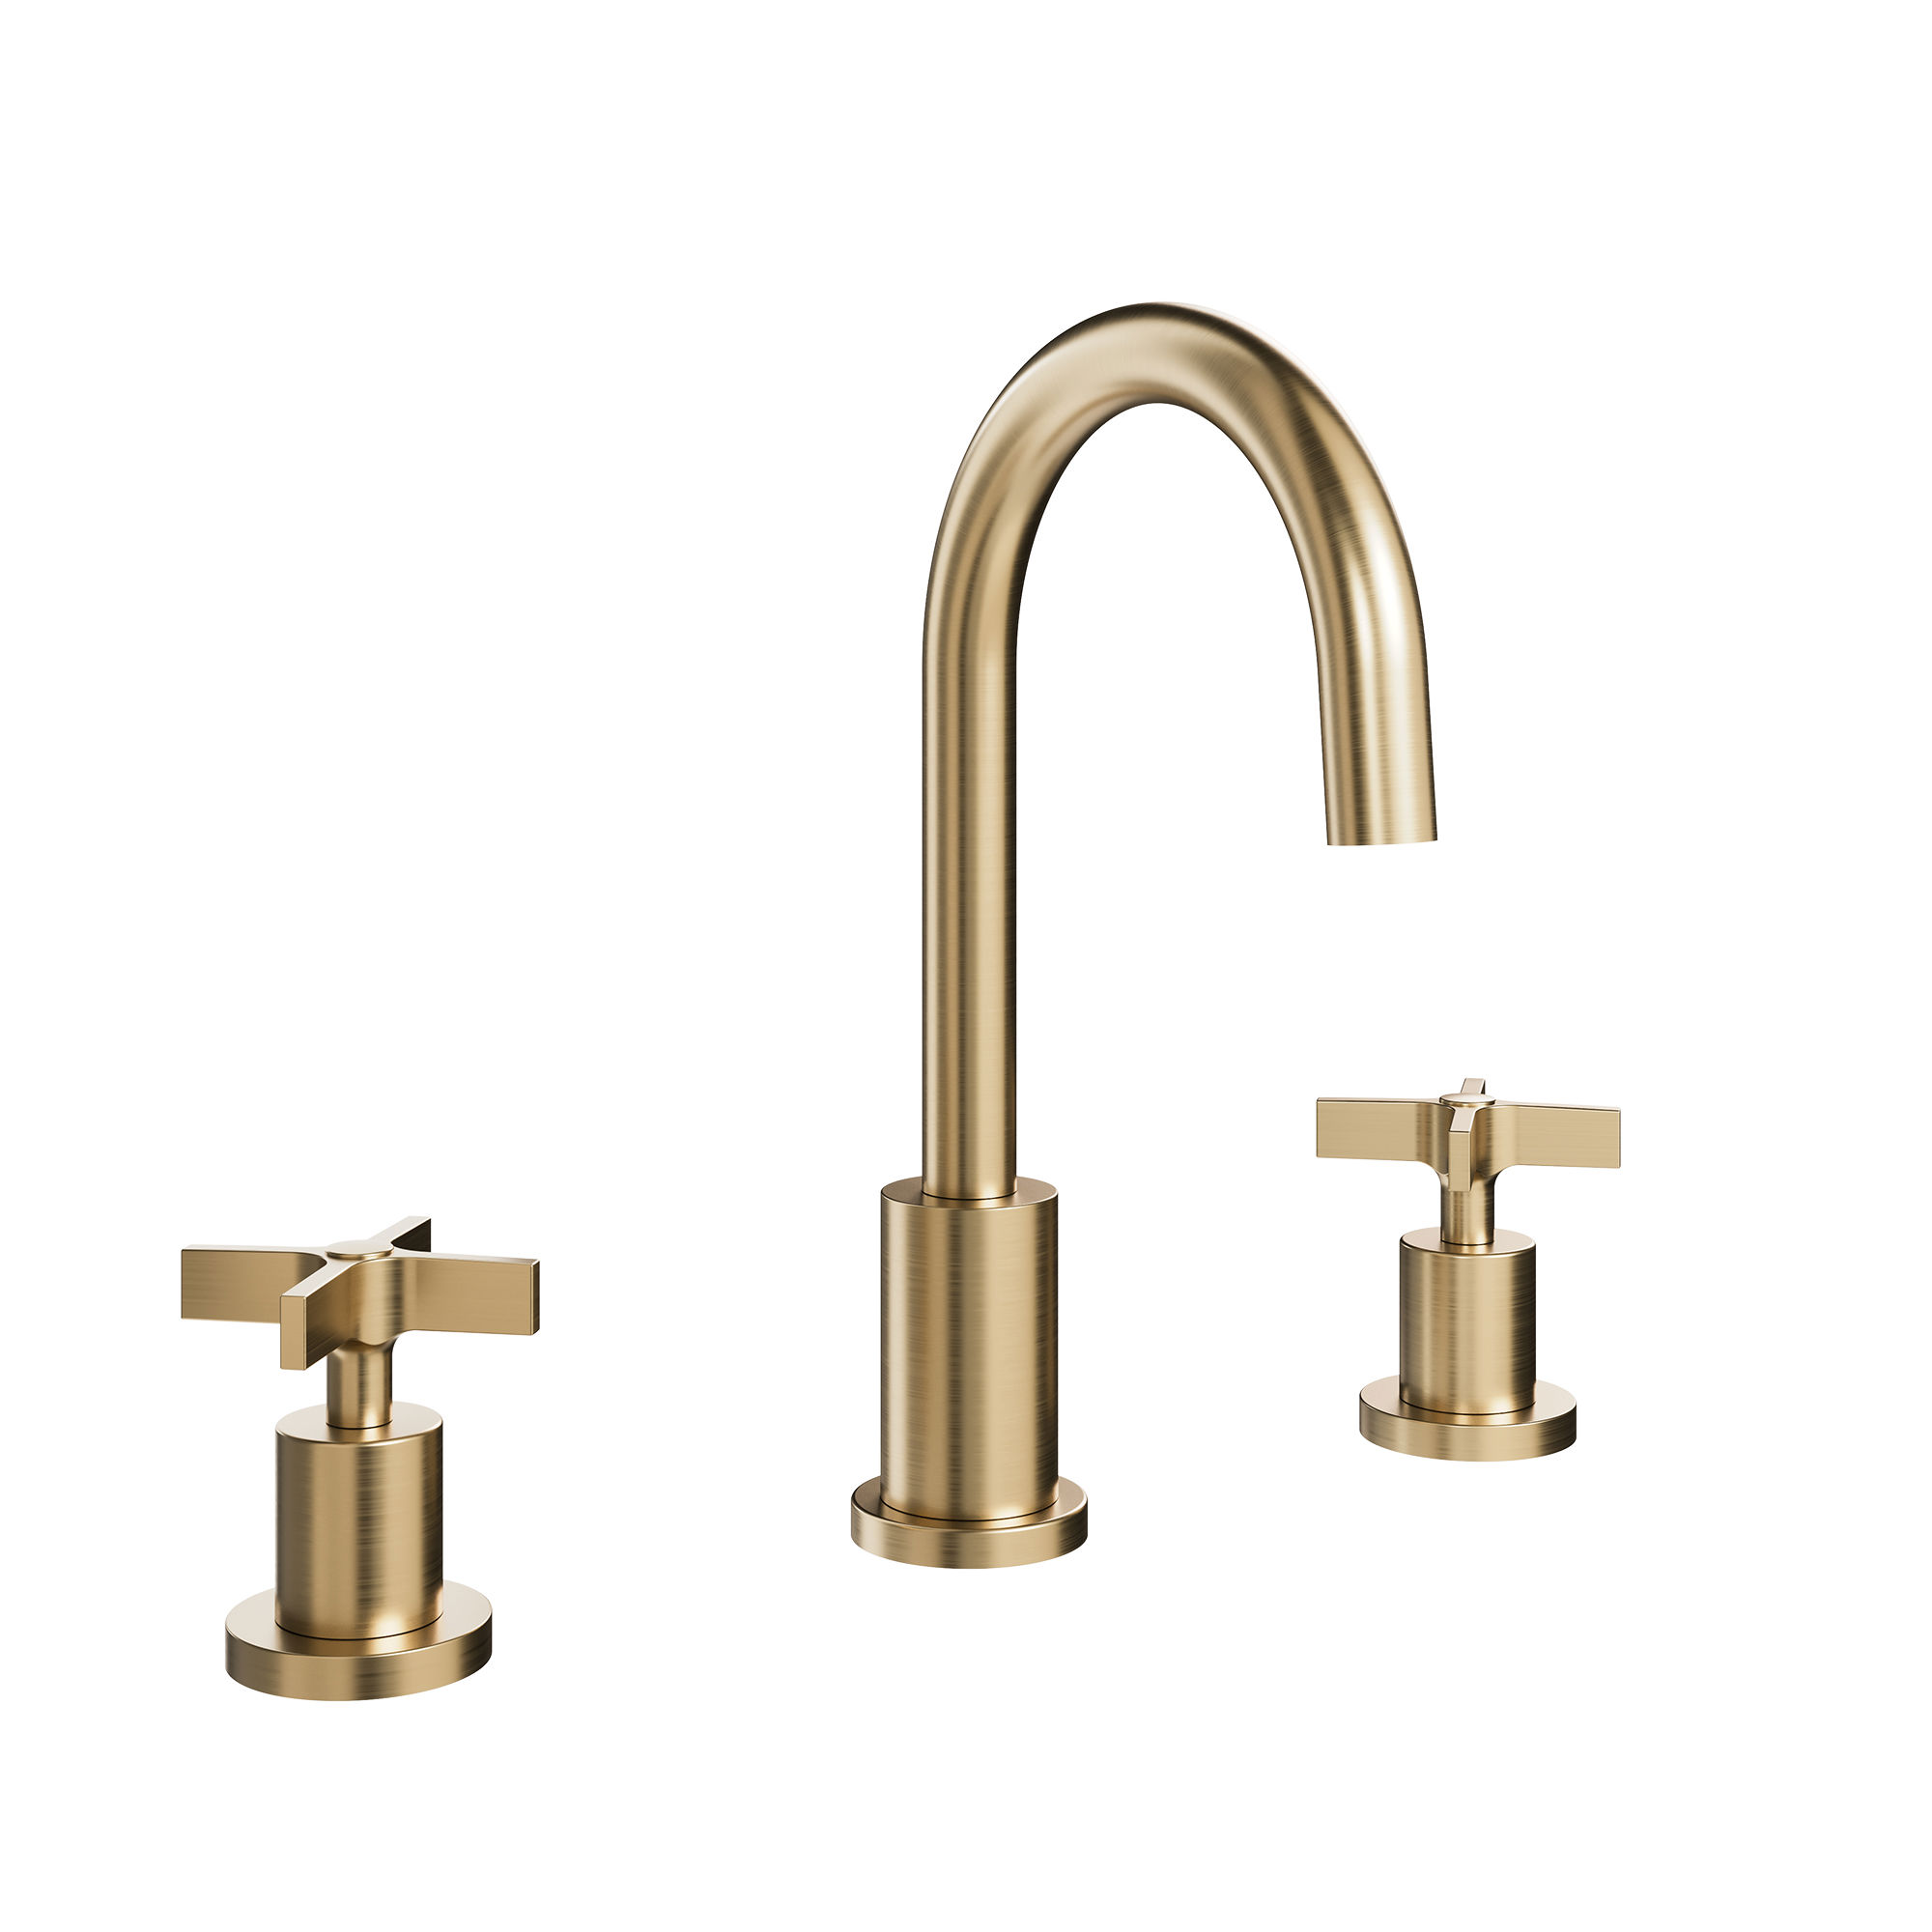 The Clover Basin 3H Deck Mounted Tap Set